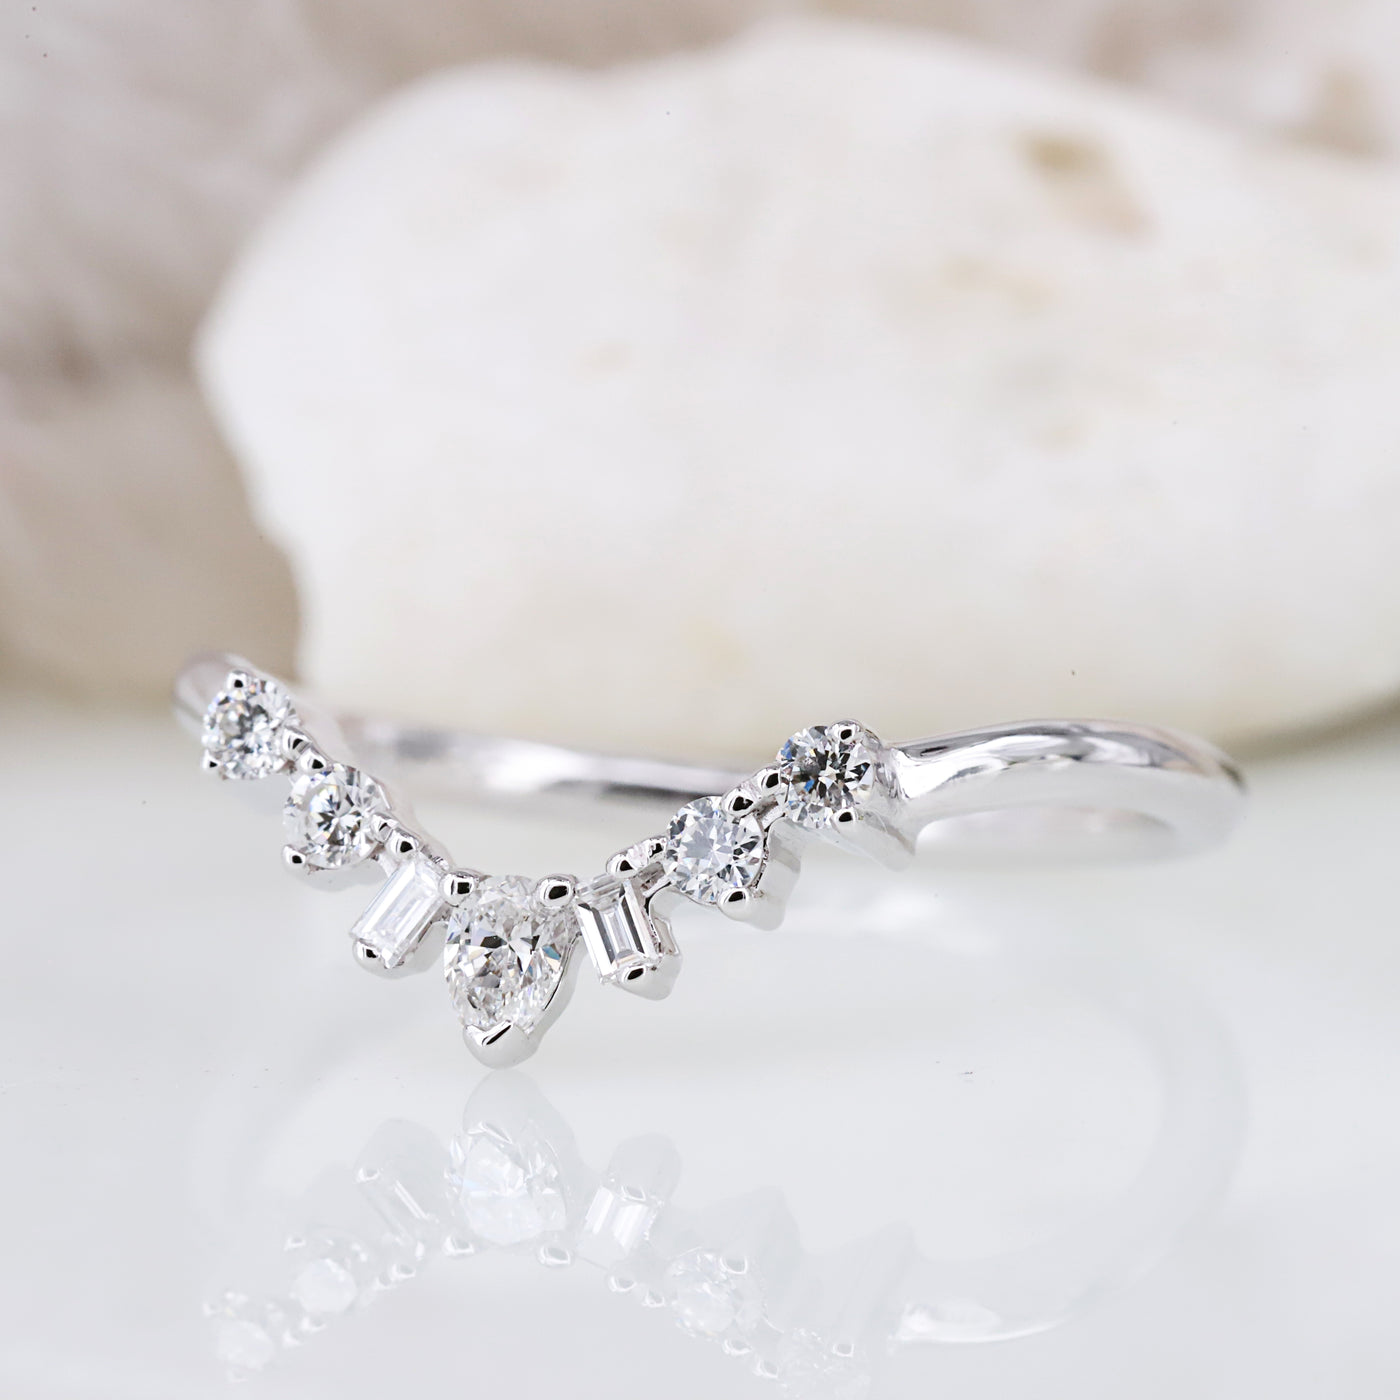 Sparkling Elegance: White Diamond Stacking Band for Effortlessly Chic Style - Perfect for Any Occasion!